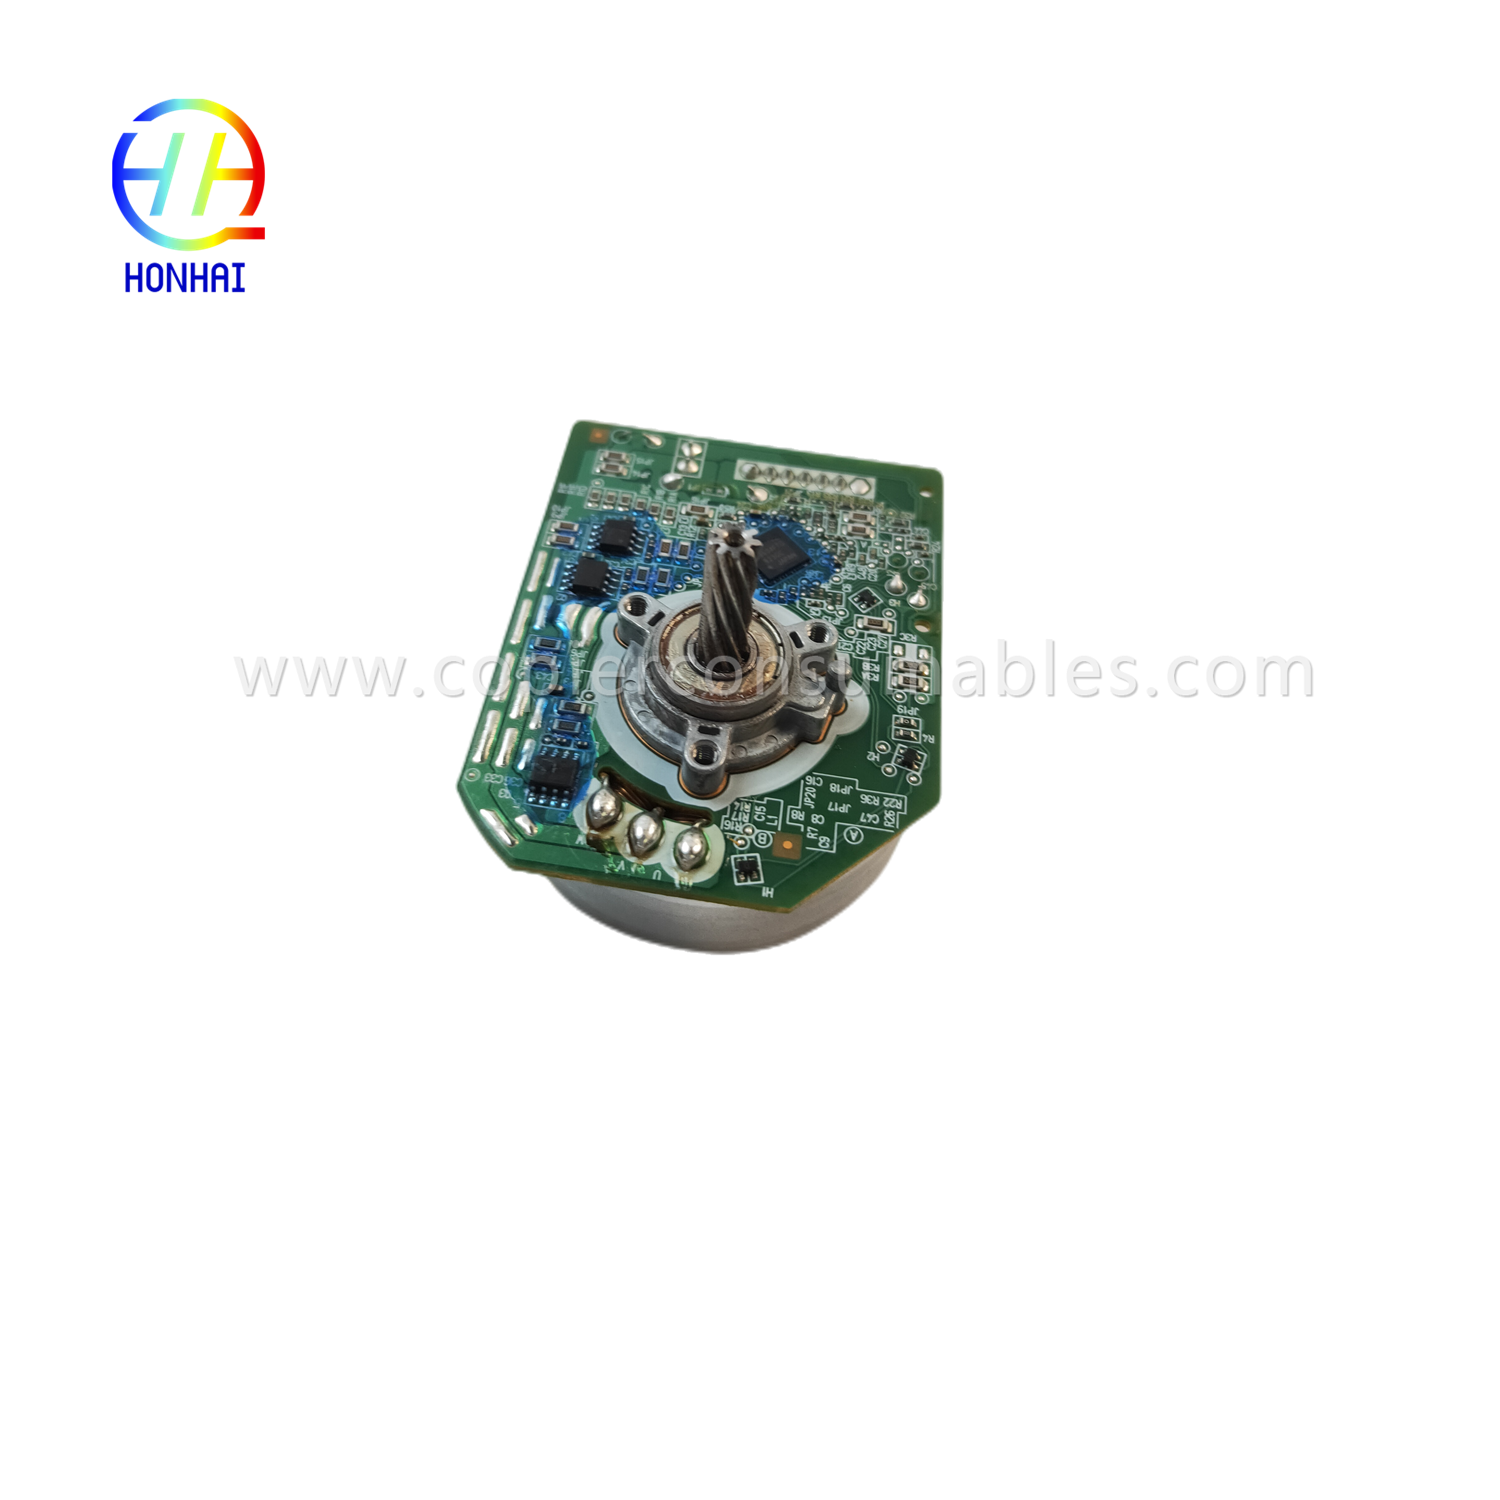 https://c585.goodao.net/motor-for-kyocera-ecosys-seri-parts-nr-302lc44014-48m069f052-b-product/